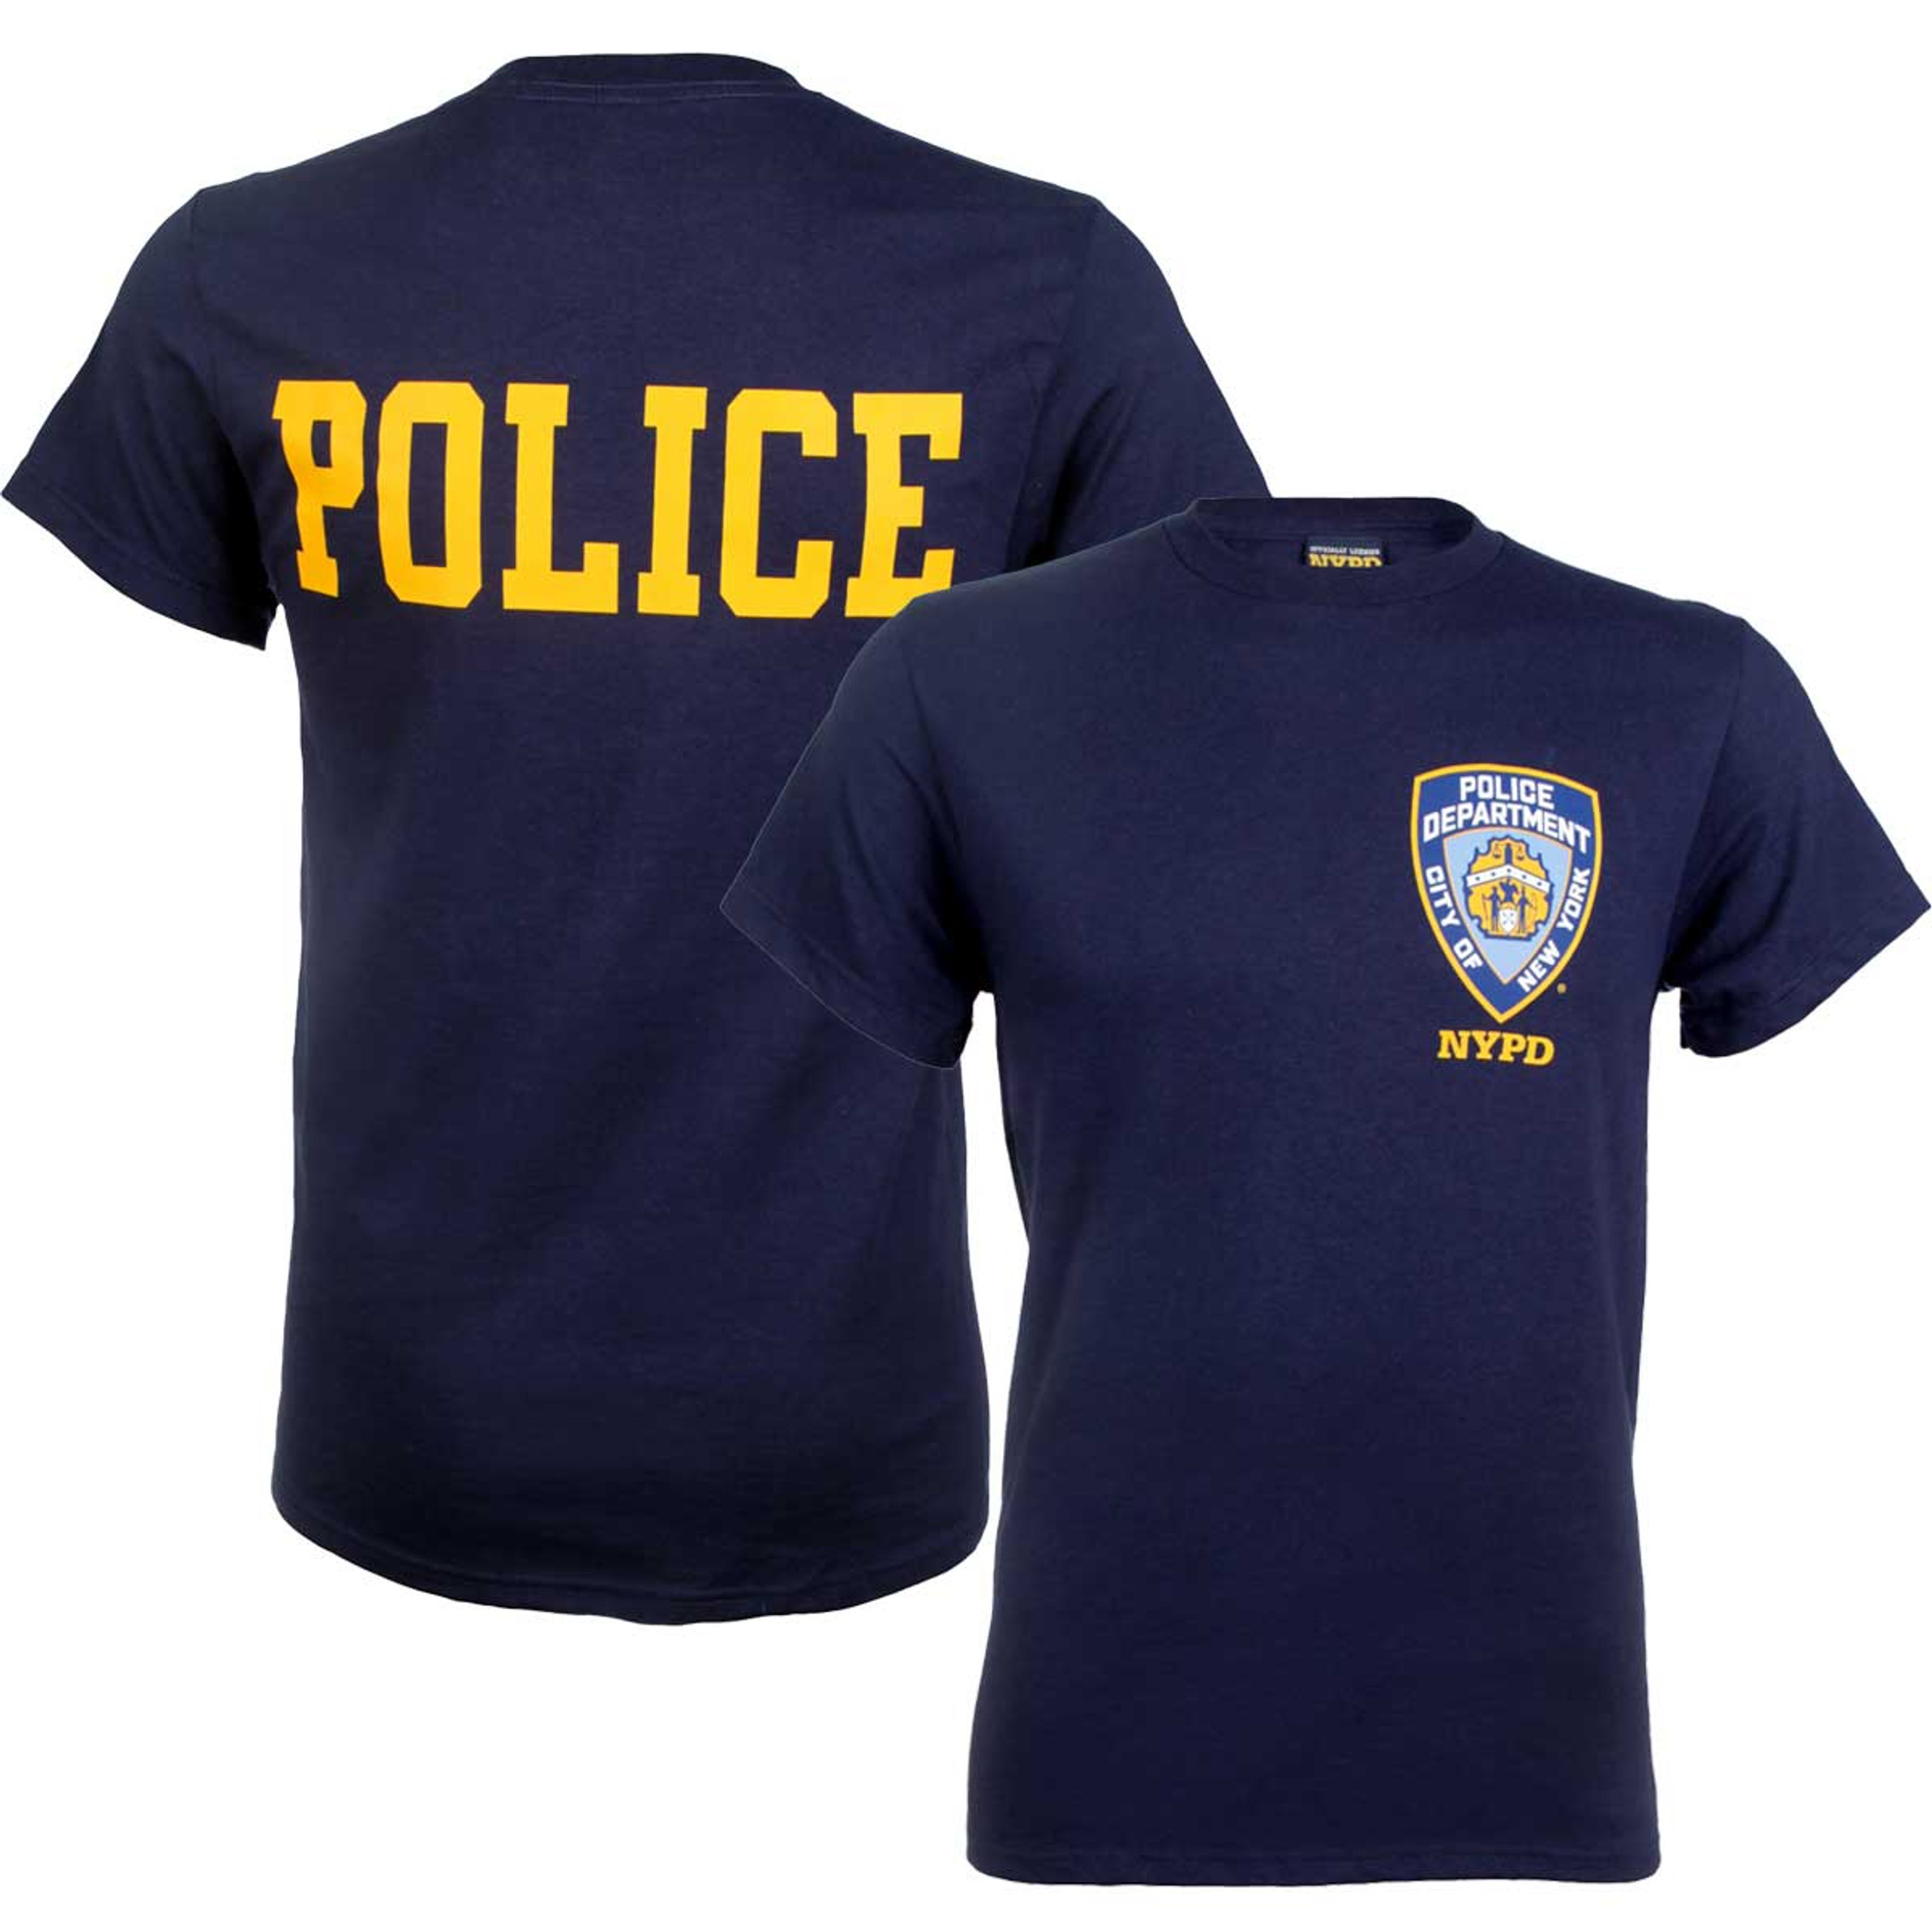 NYPD Badge T-Shirt with POLICE on Back